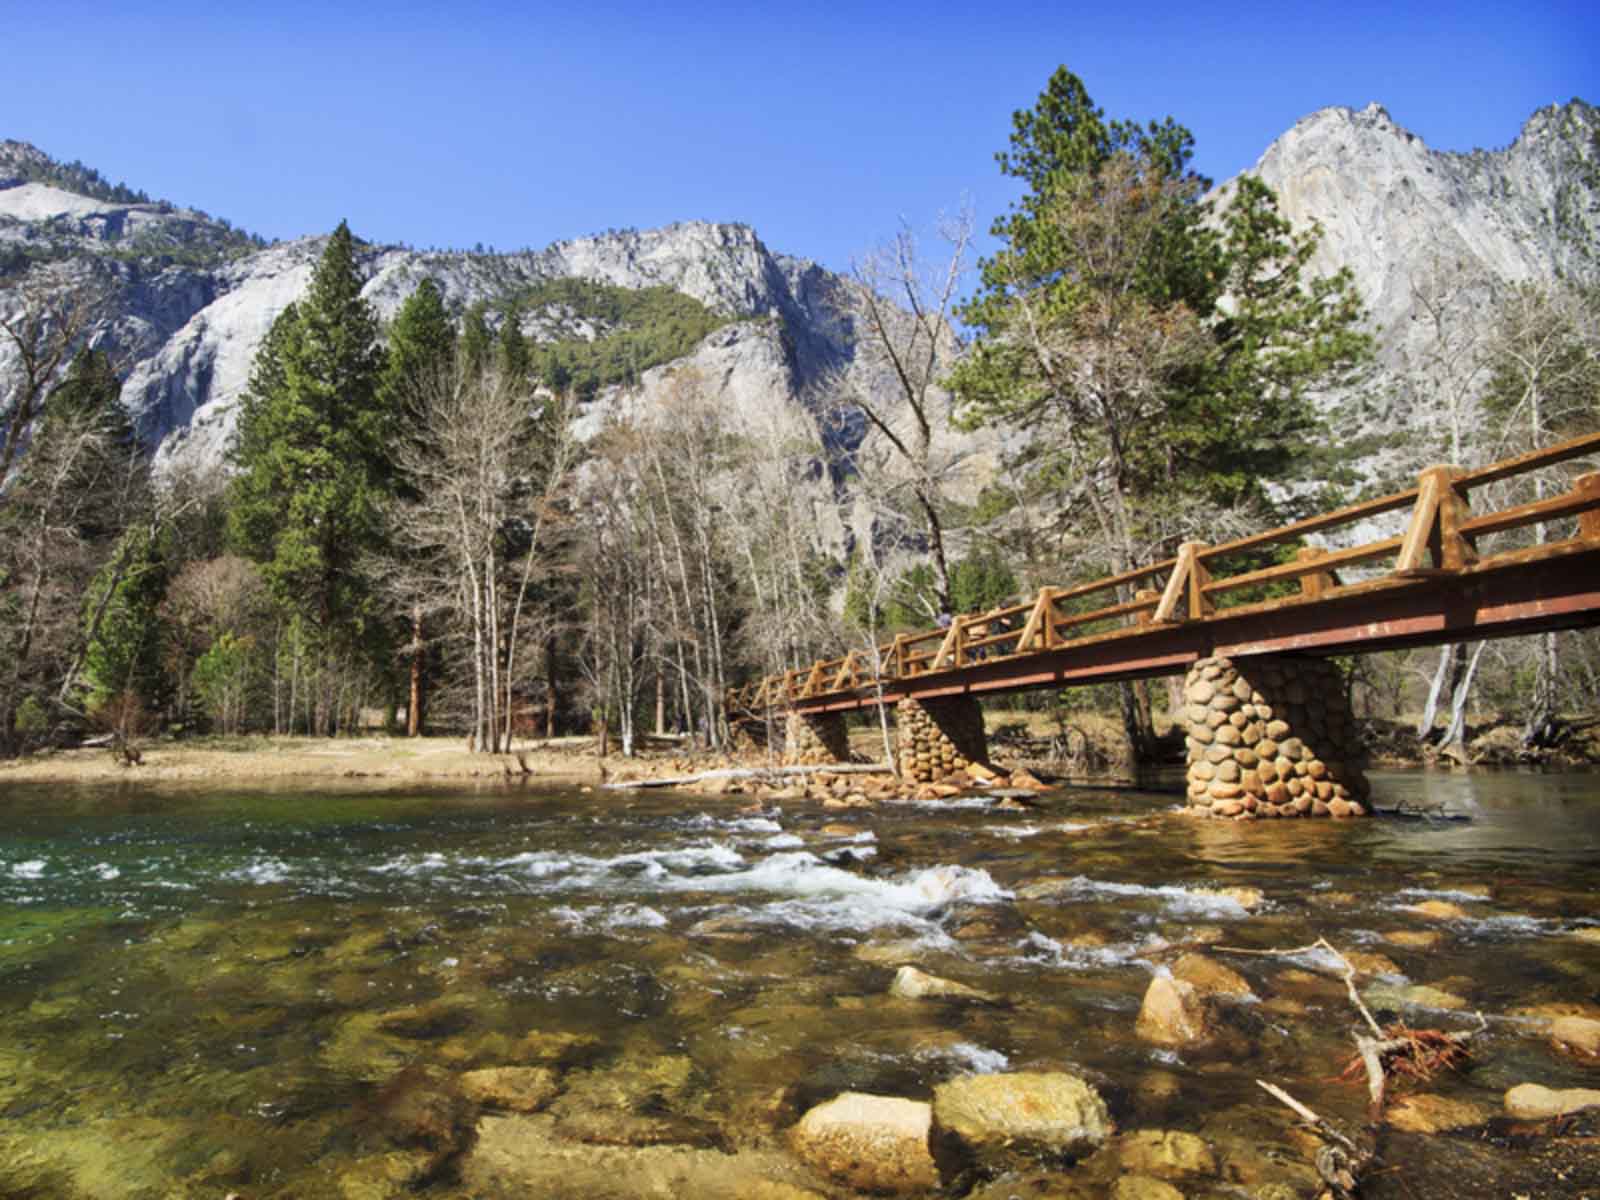 Five Of The Best Trails in Yosemite